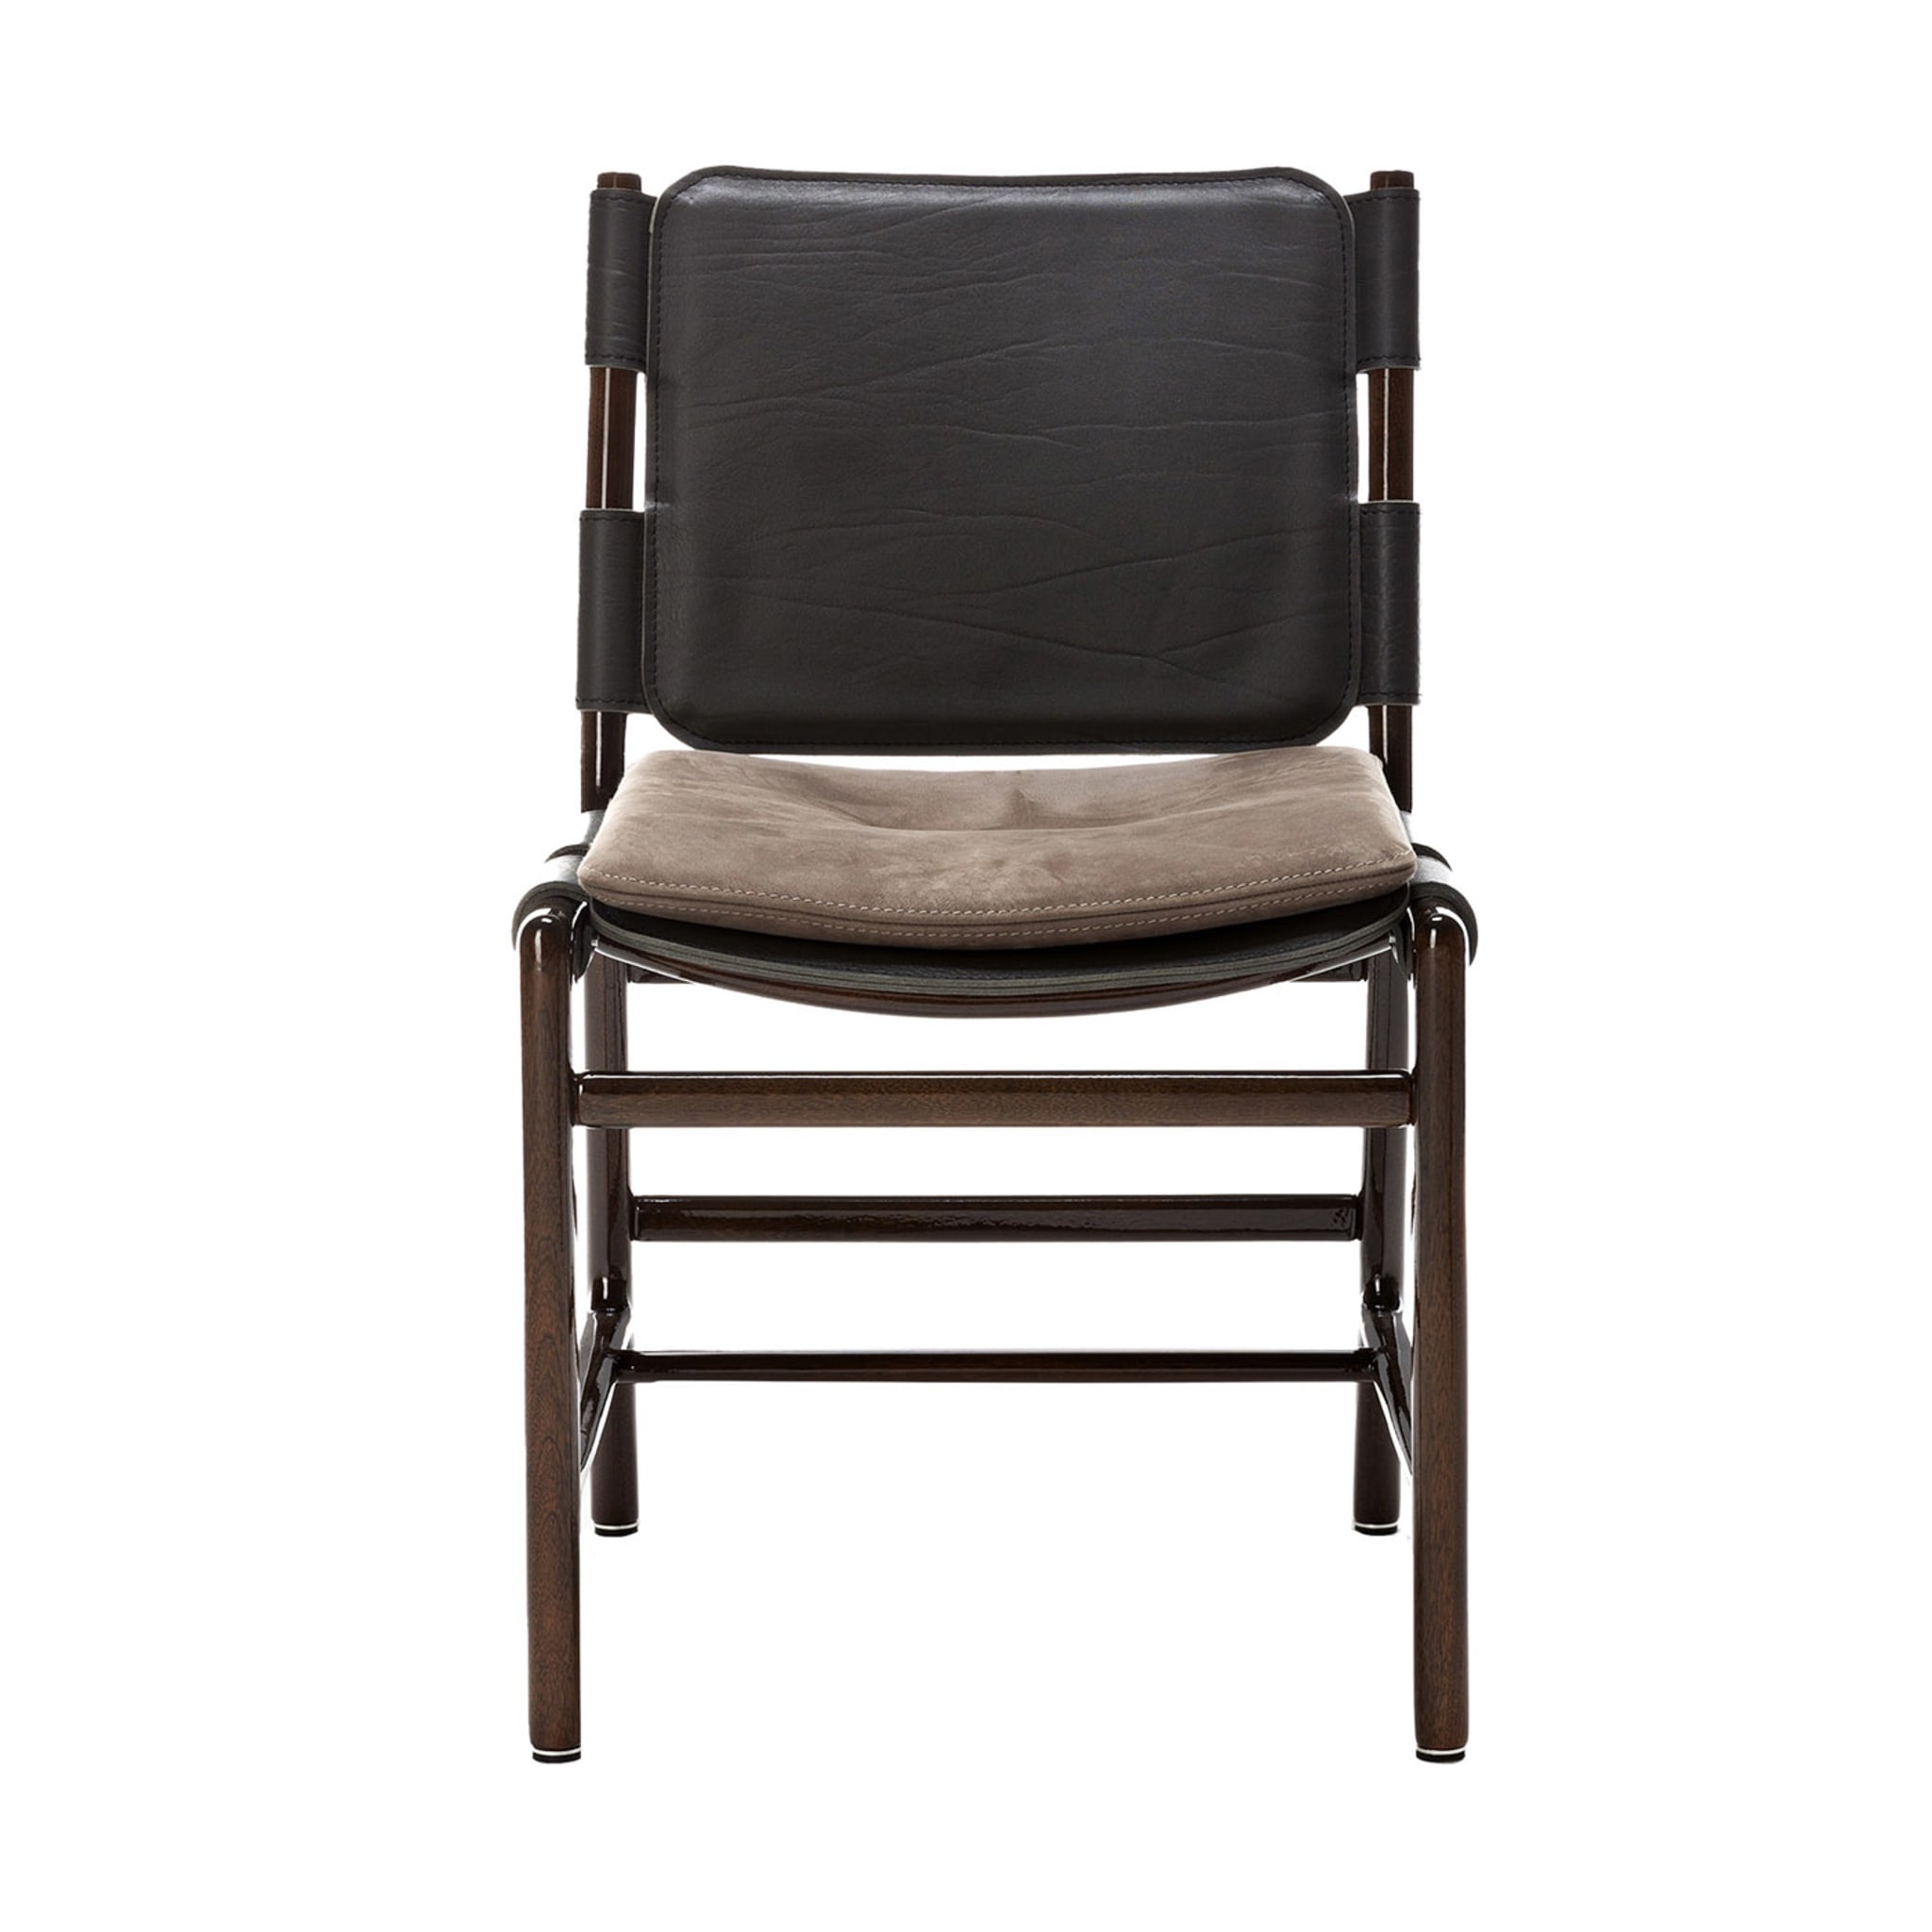 Levante Dark Leather Chair by Massimo Castagna - Main view